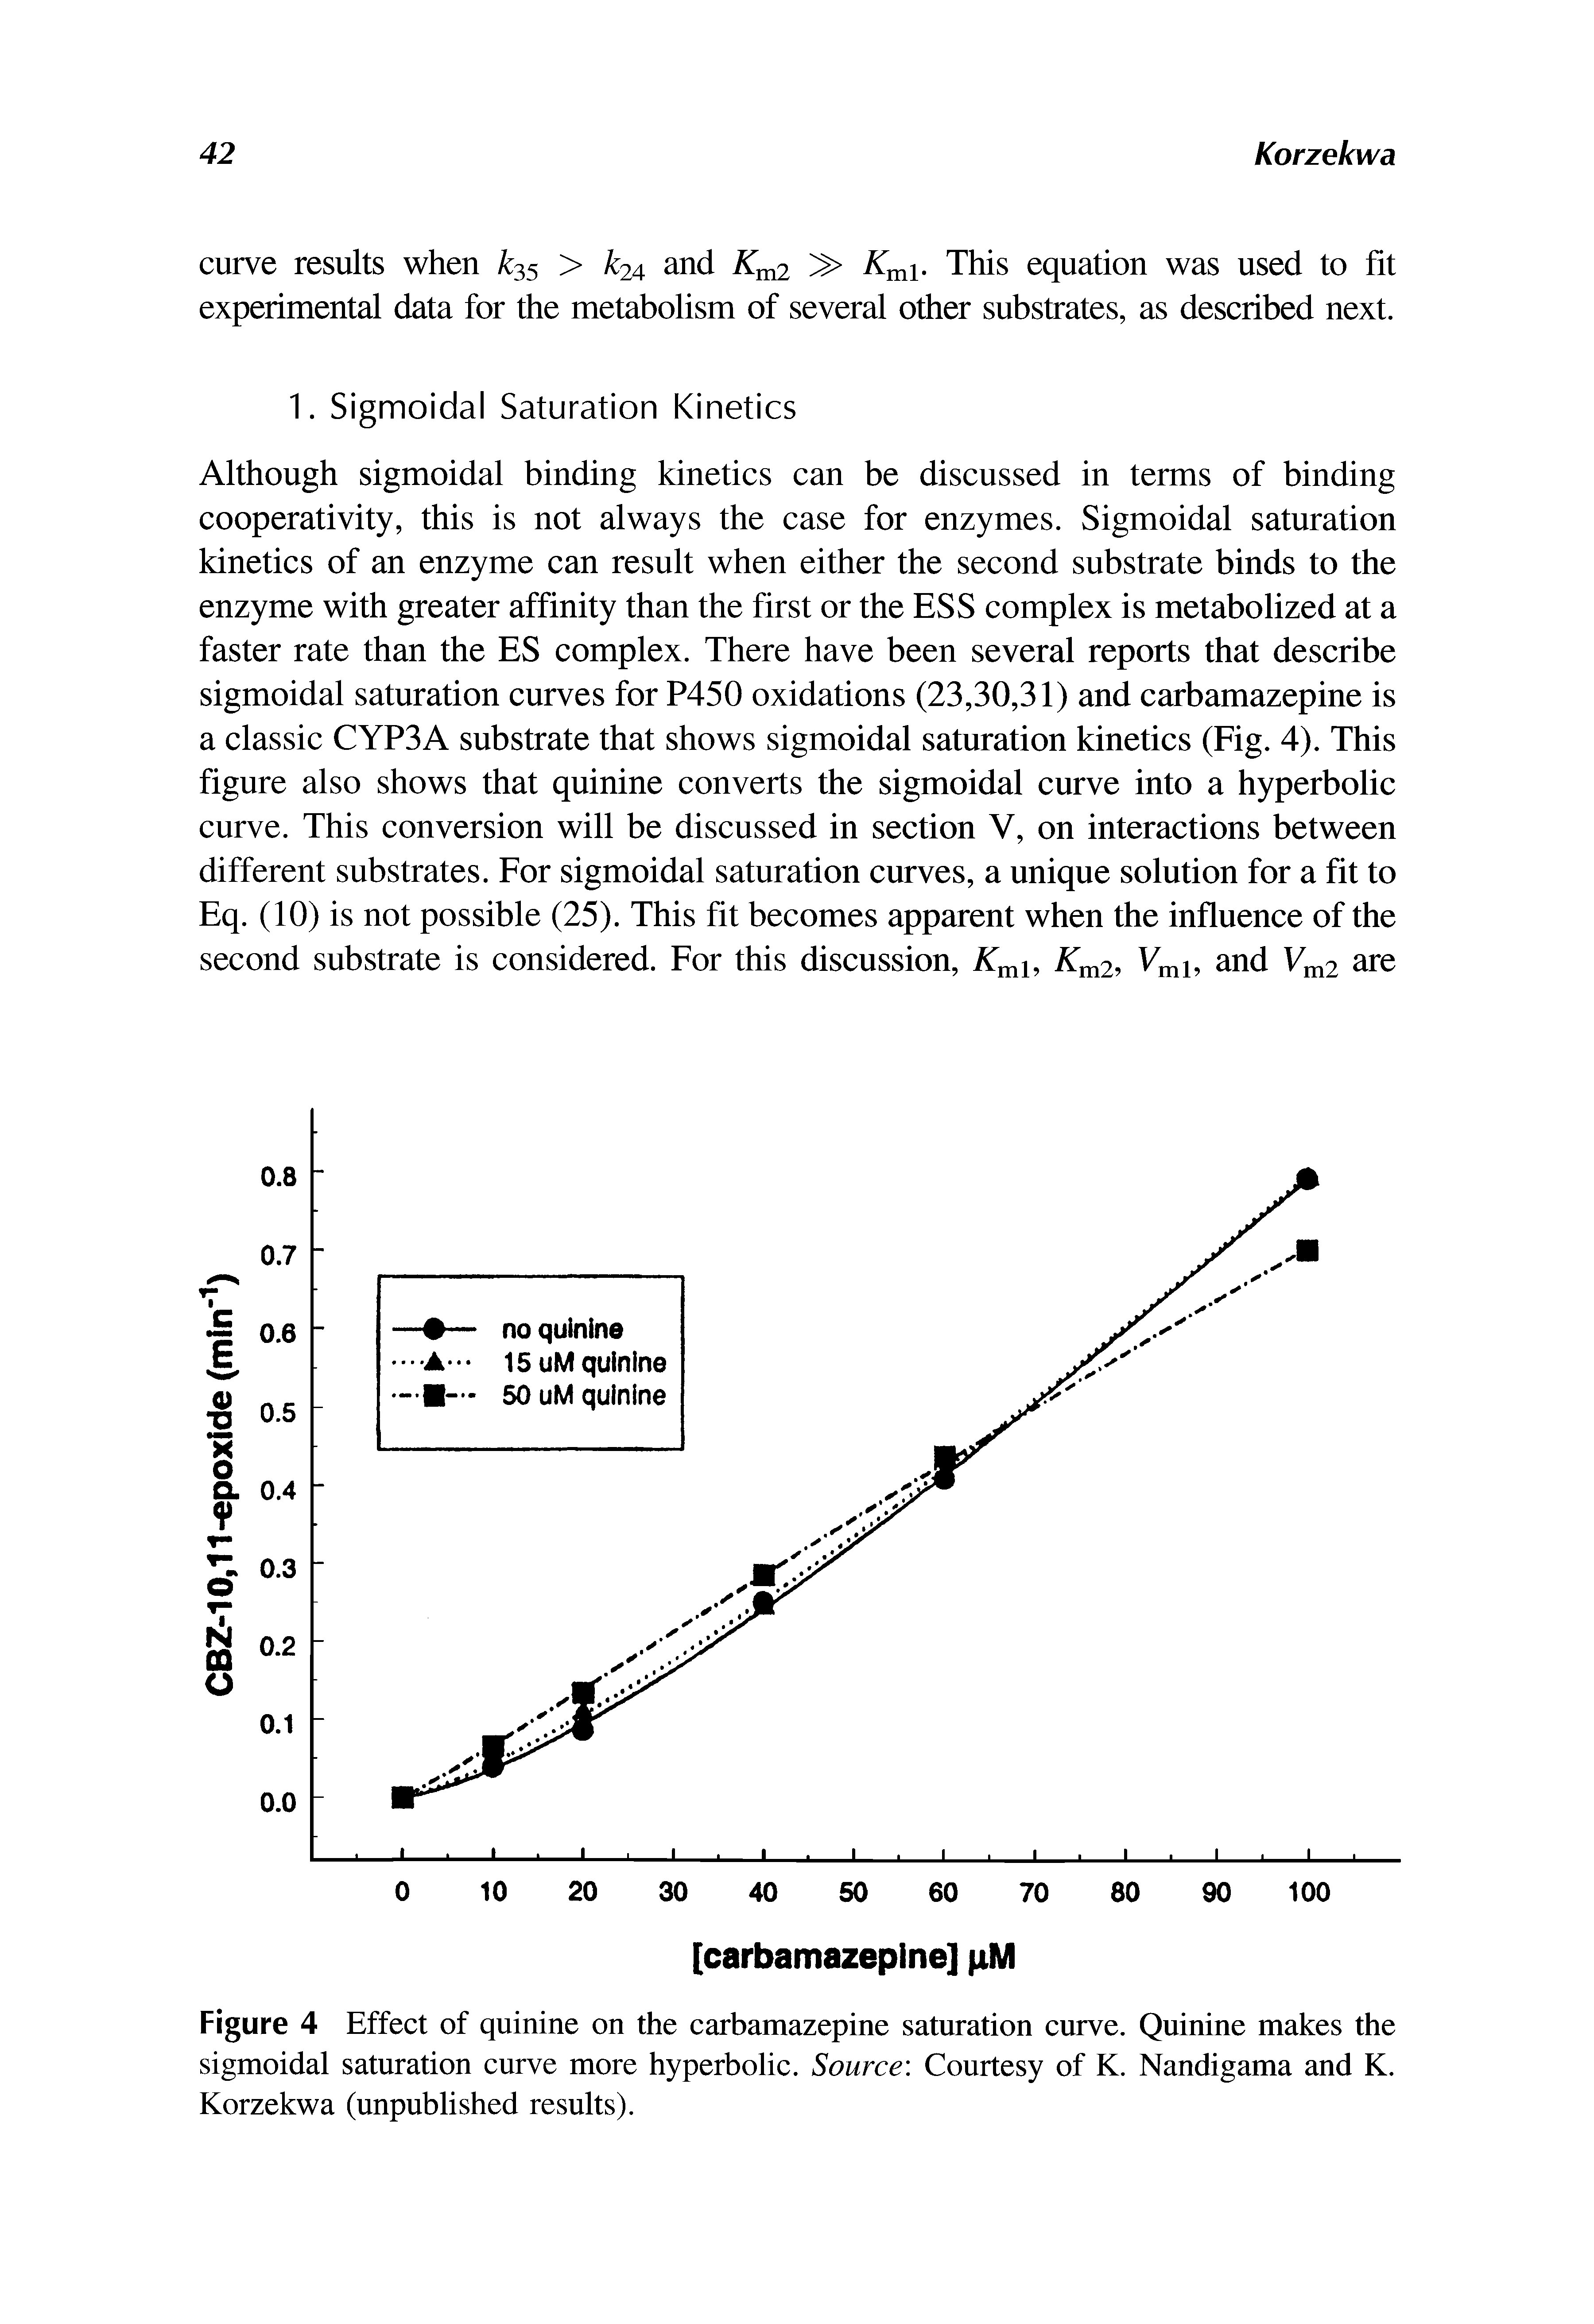 Figure 4 Effect of quinine on the carbamazepine saturation curve. Quinine makes the sigmoidal saturation curve more hyperbolic. Source Courtesy of K. Nandigama and K. Korzekwa (unpublished results).